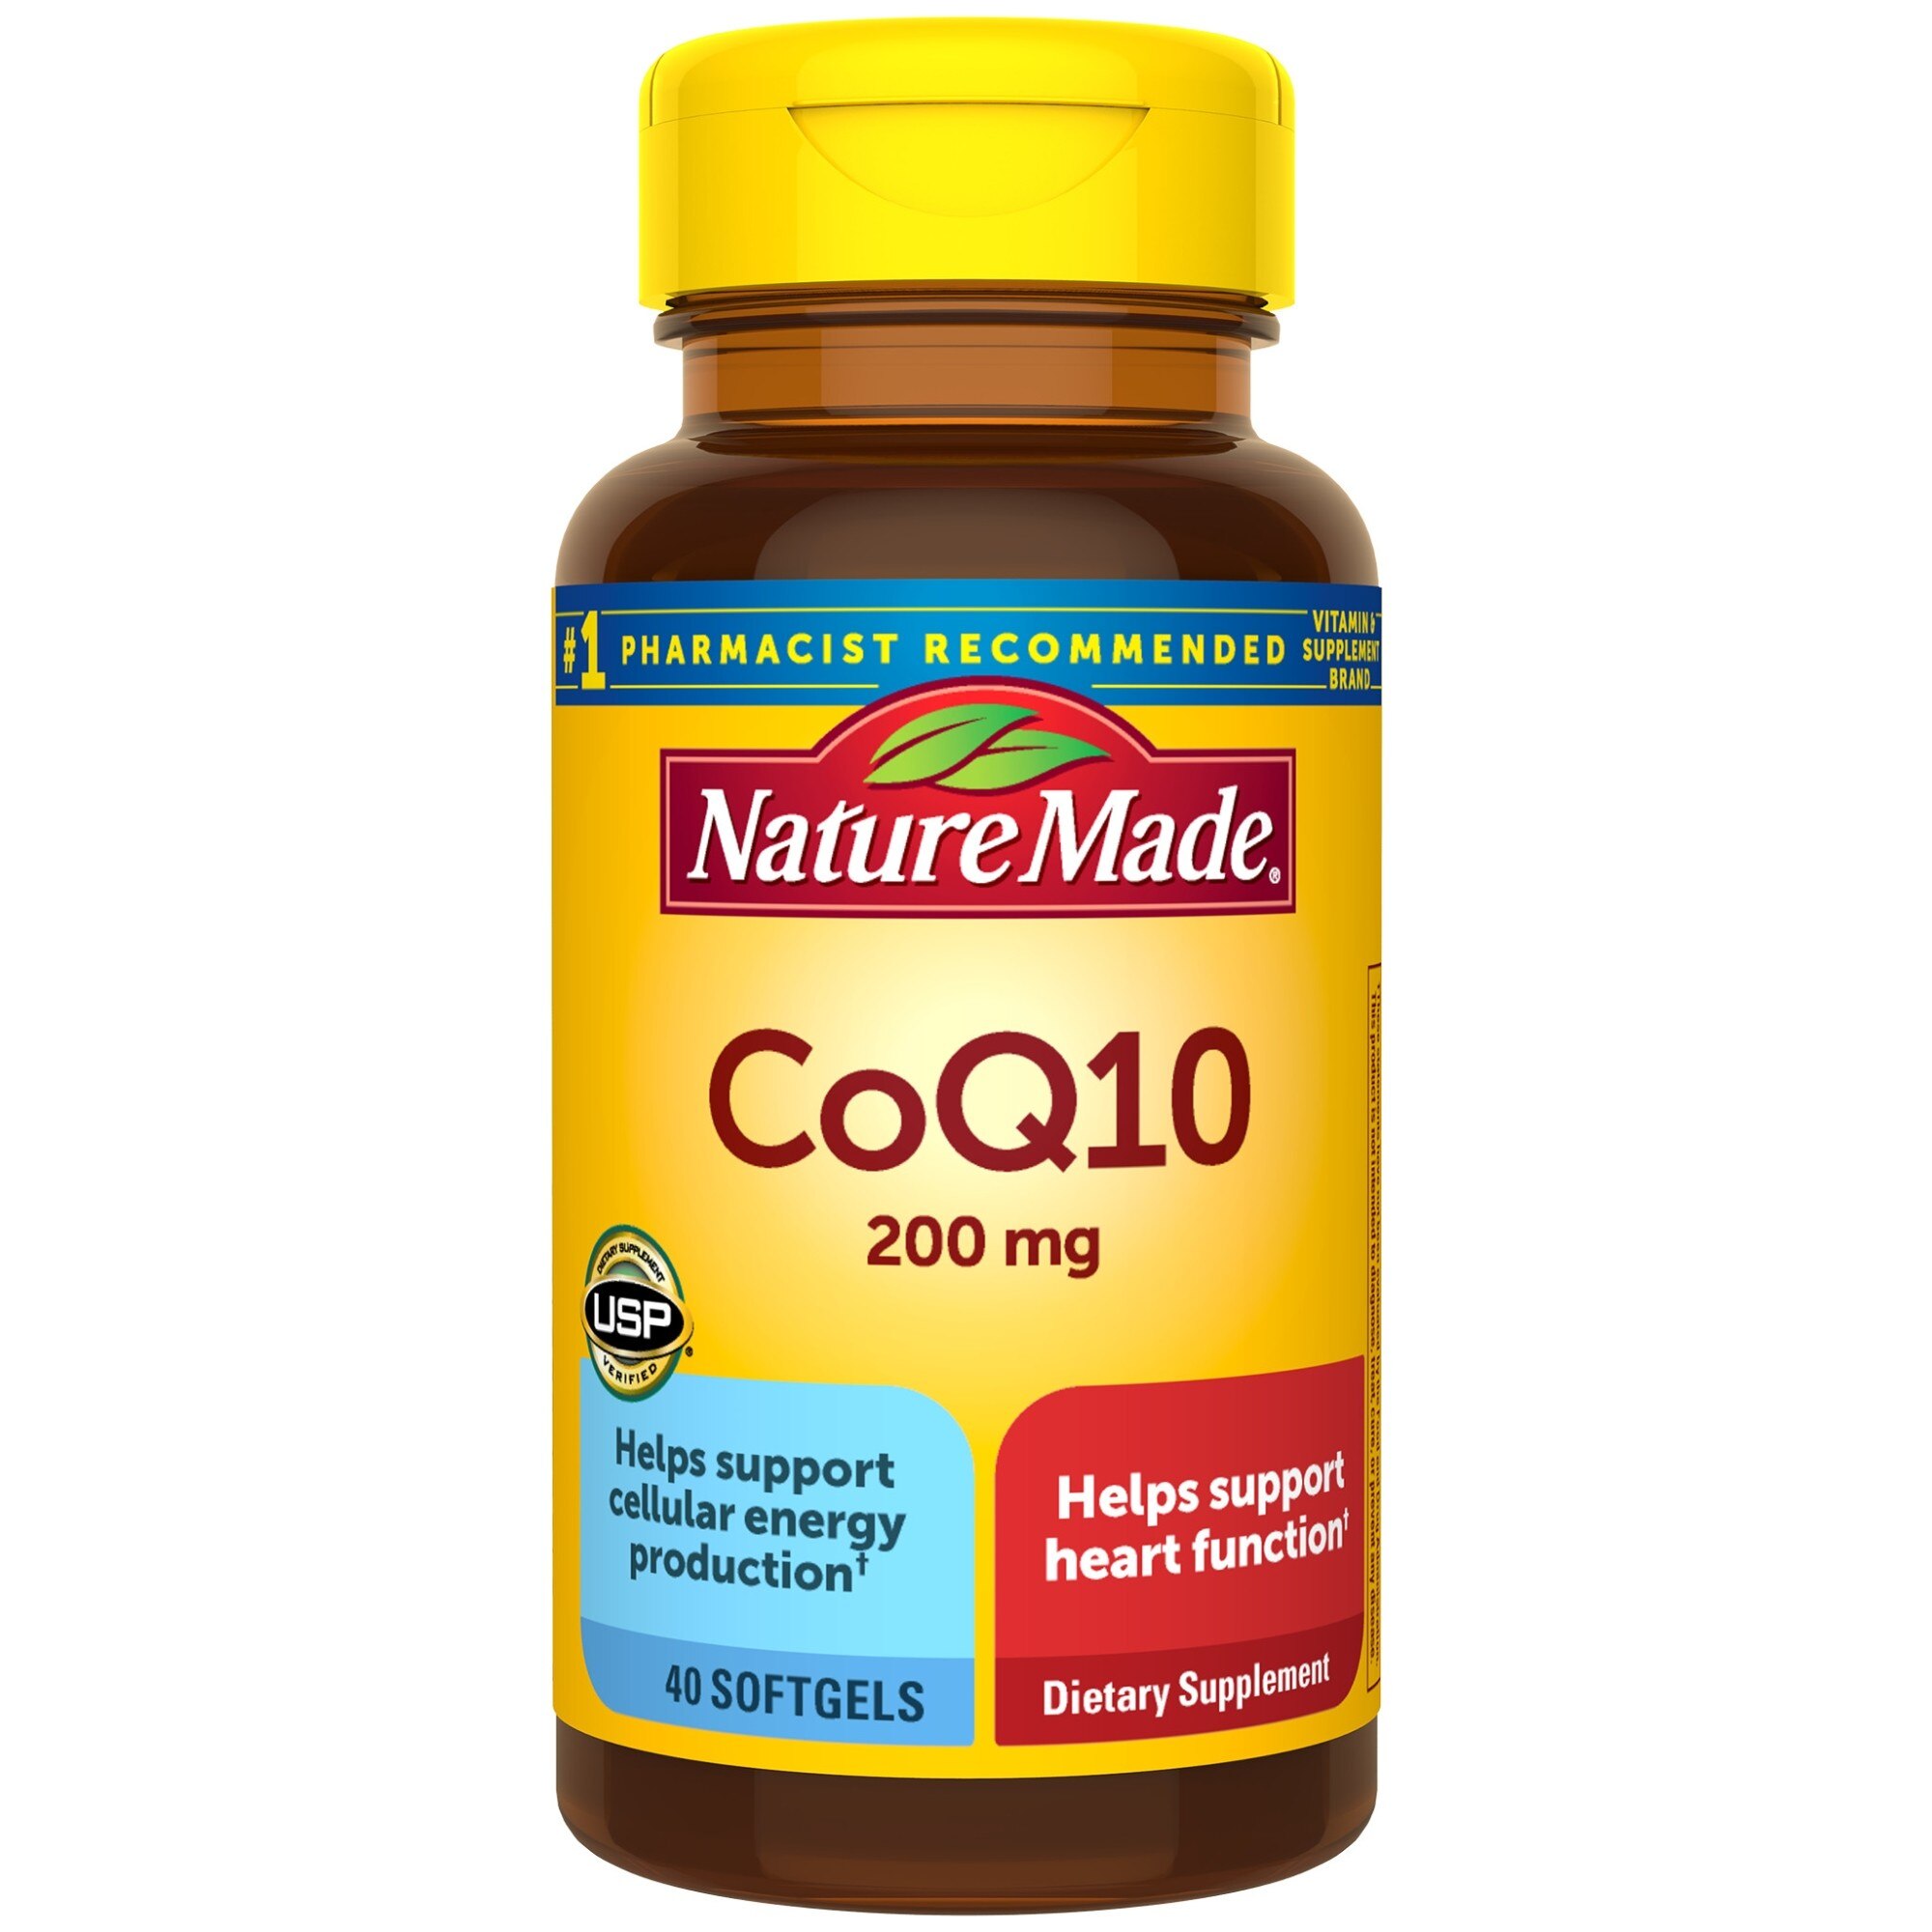 Nature Made CoQ10 200 mg Softgels, Dietary Supplement for Heart Health and Cellular Energy Production, 40 CT